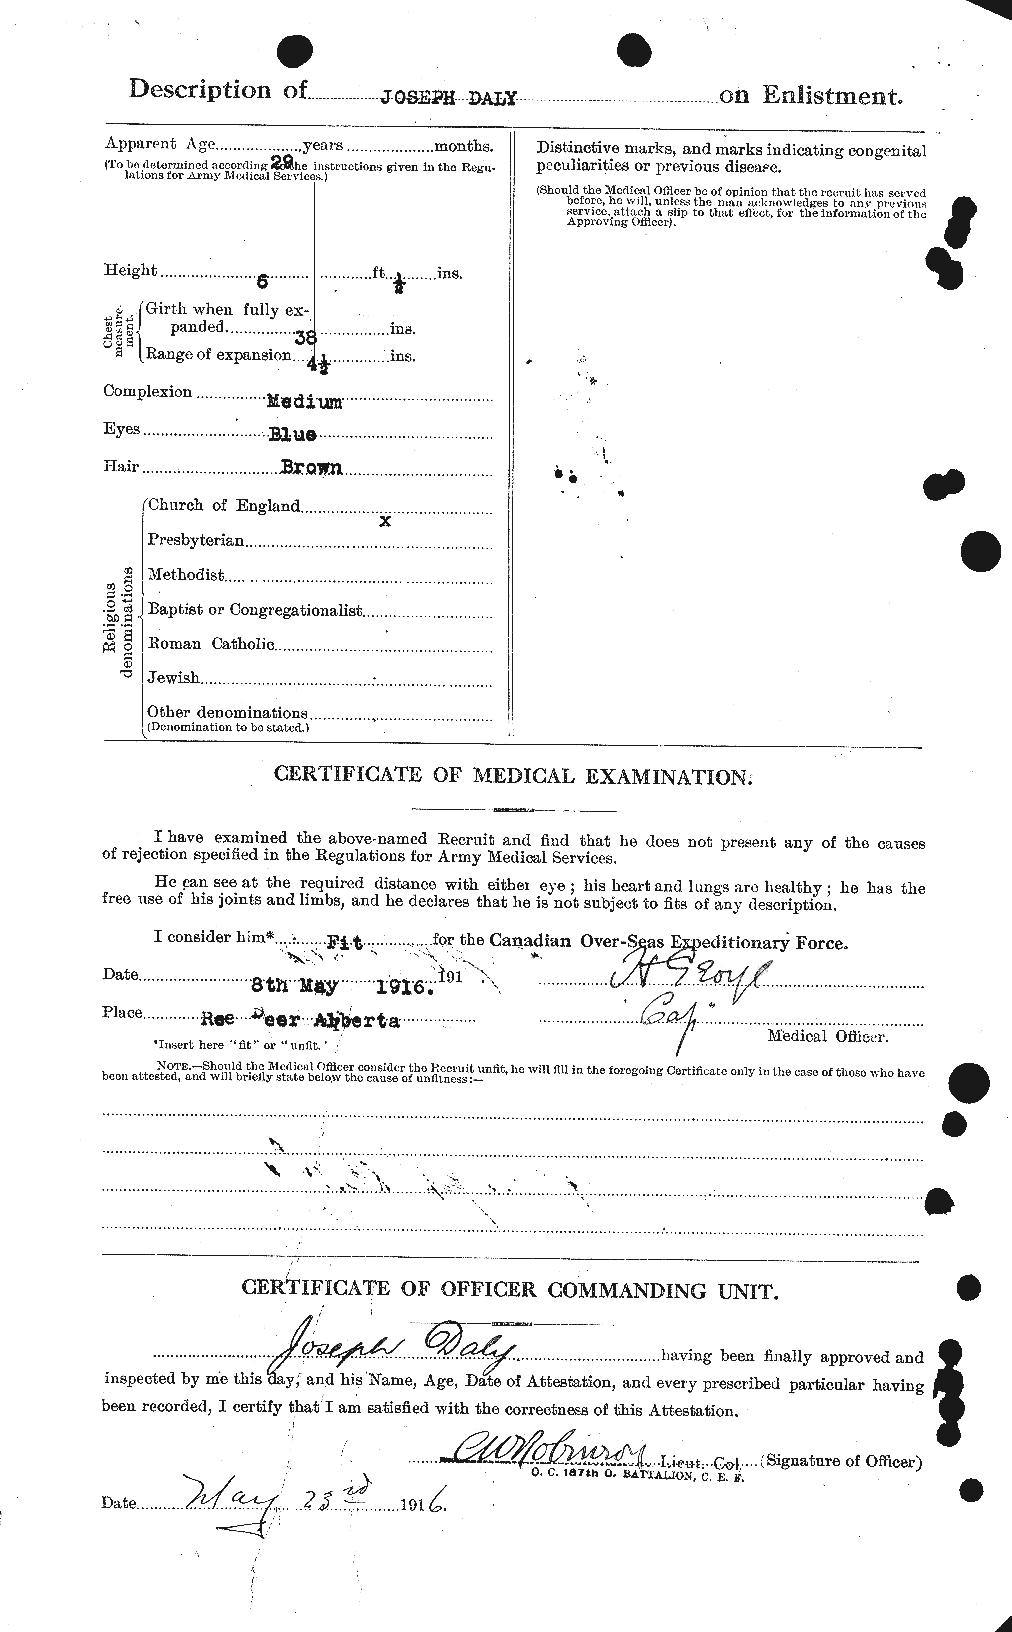 Personnel Records of the First World War - CEF 276369b